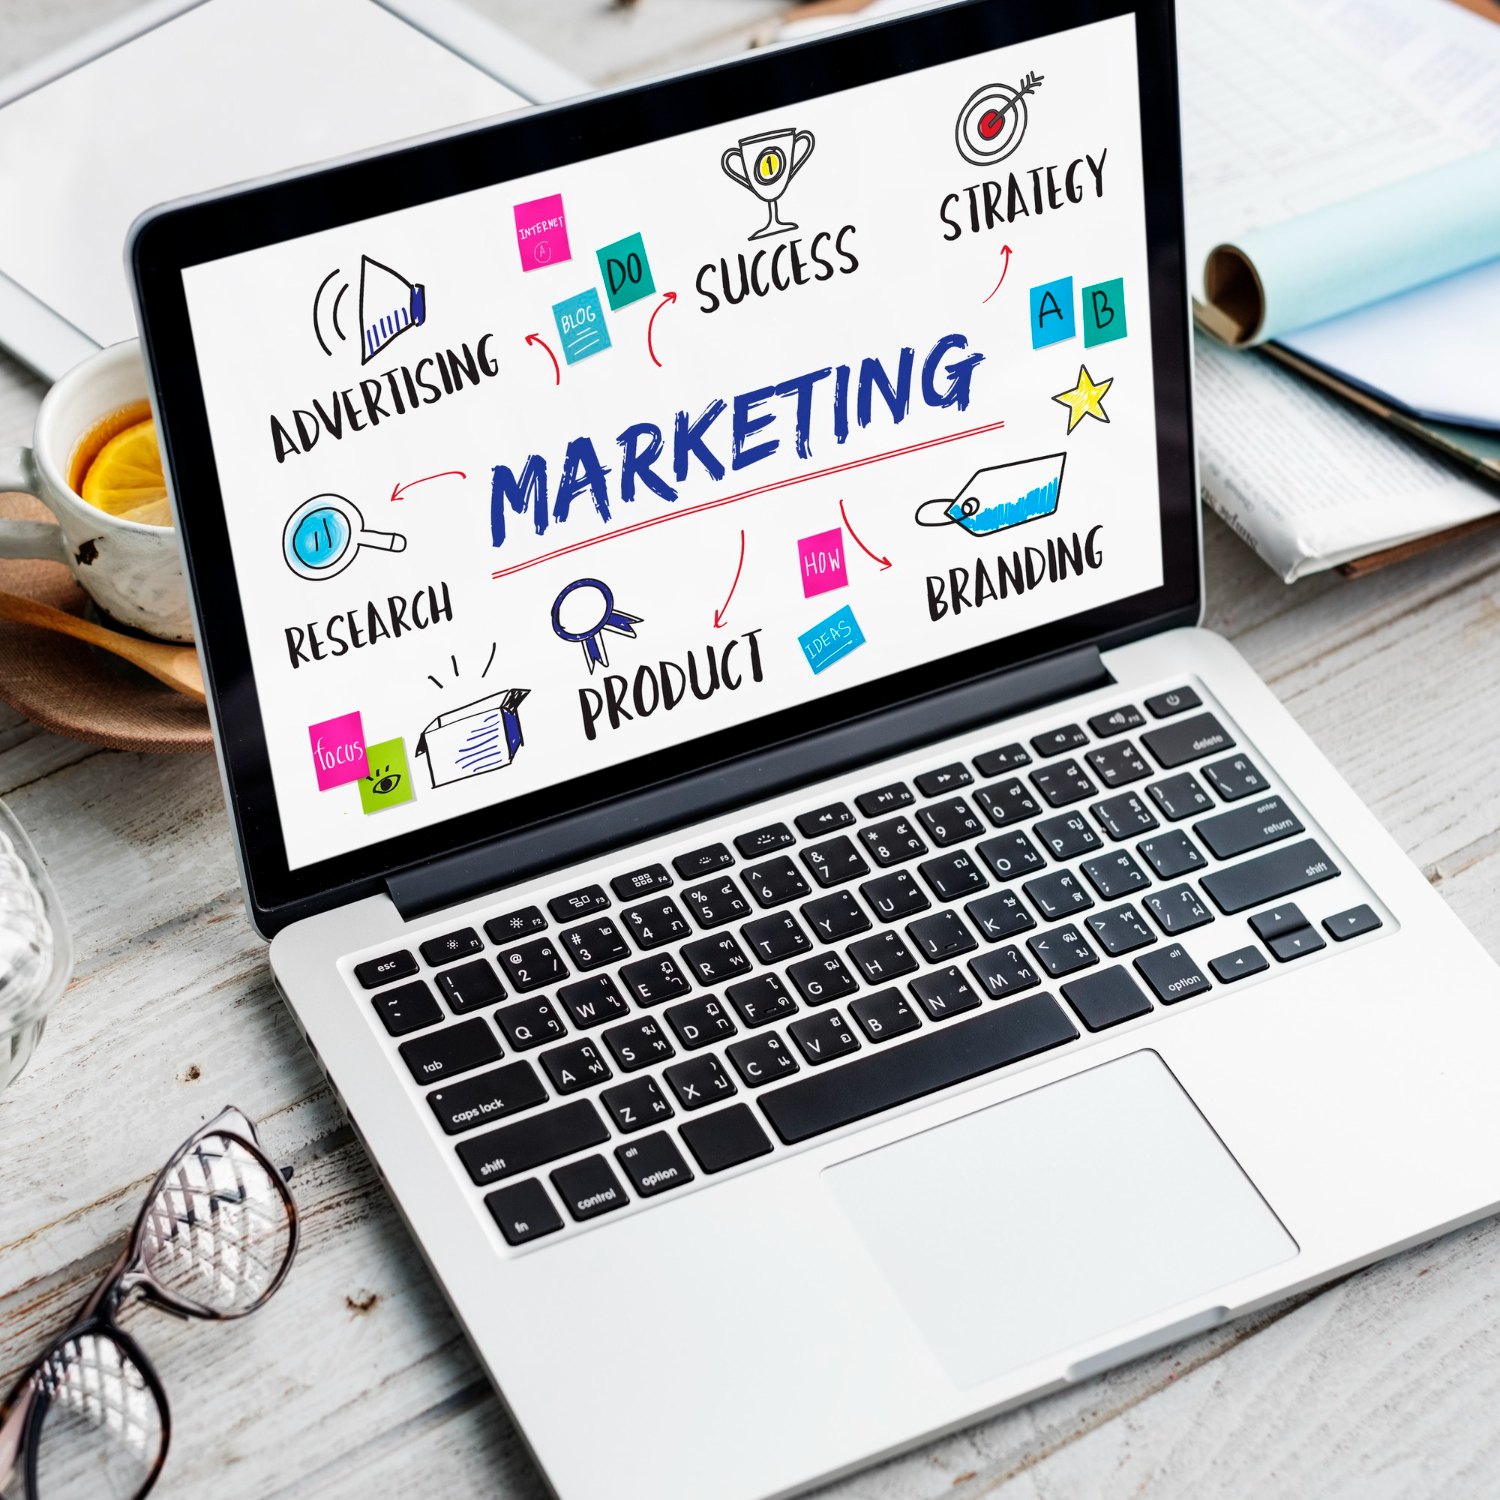 What Does A Basic Digital Marketing Campaign For Small Business Look Like in 2021 – see here!